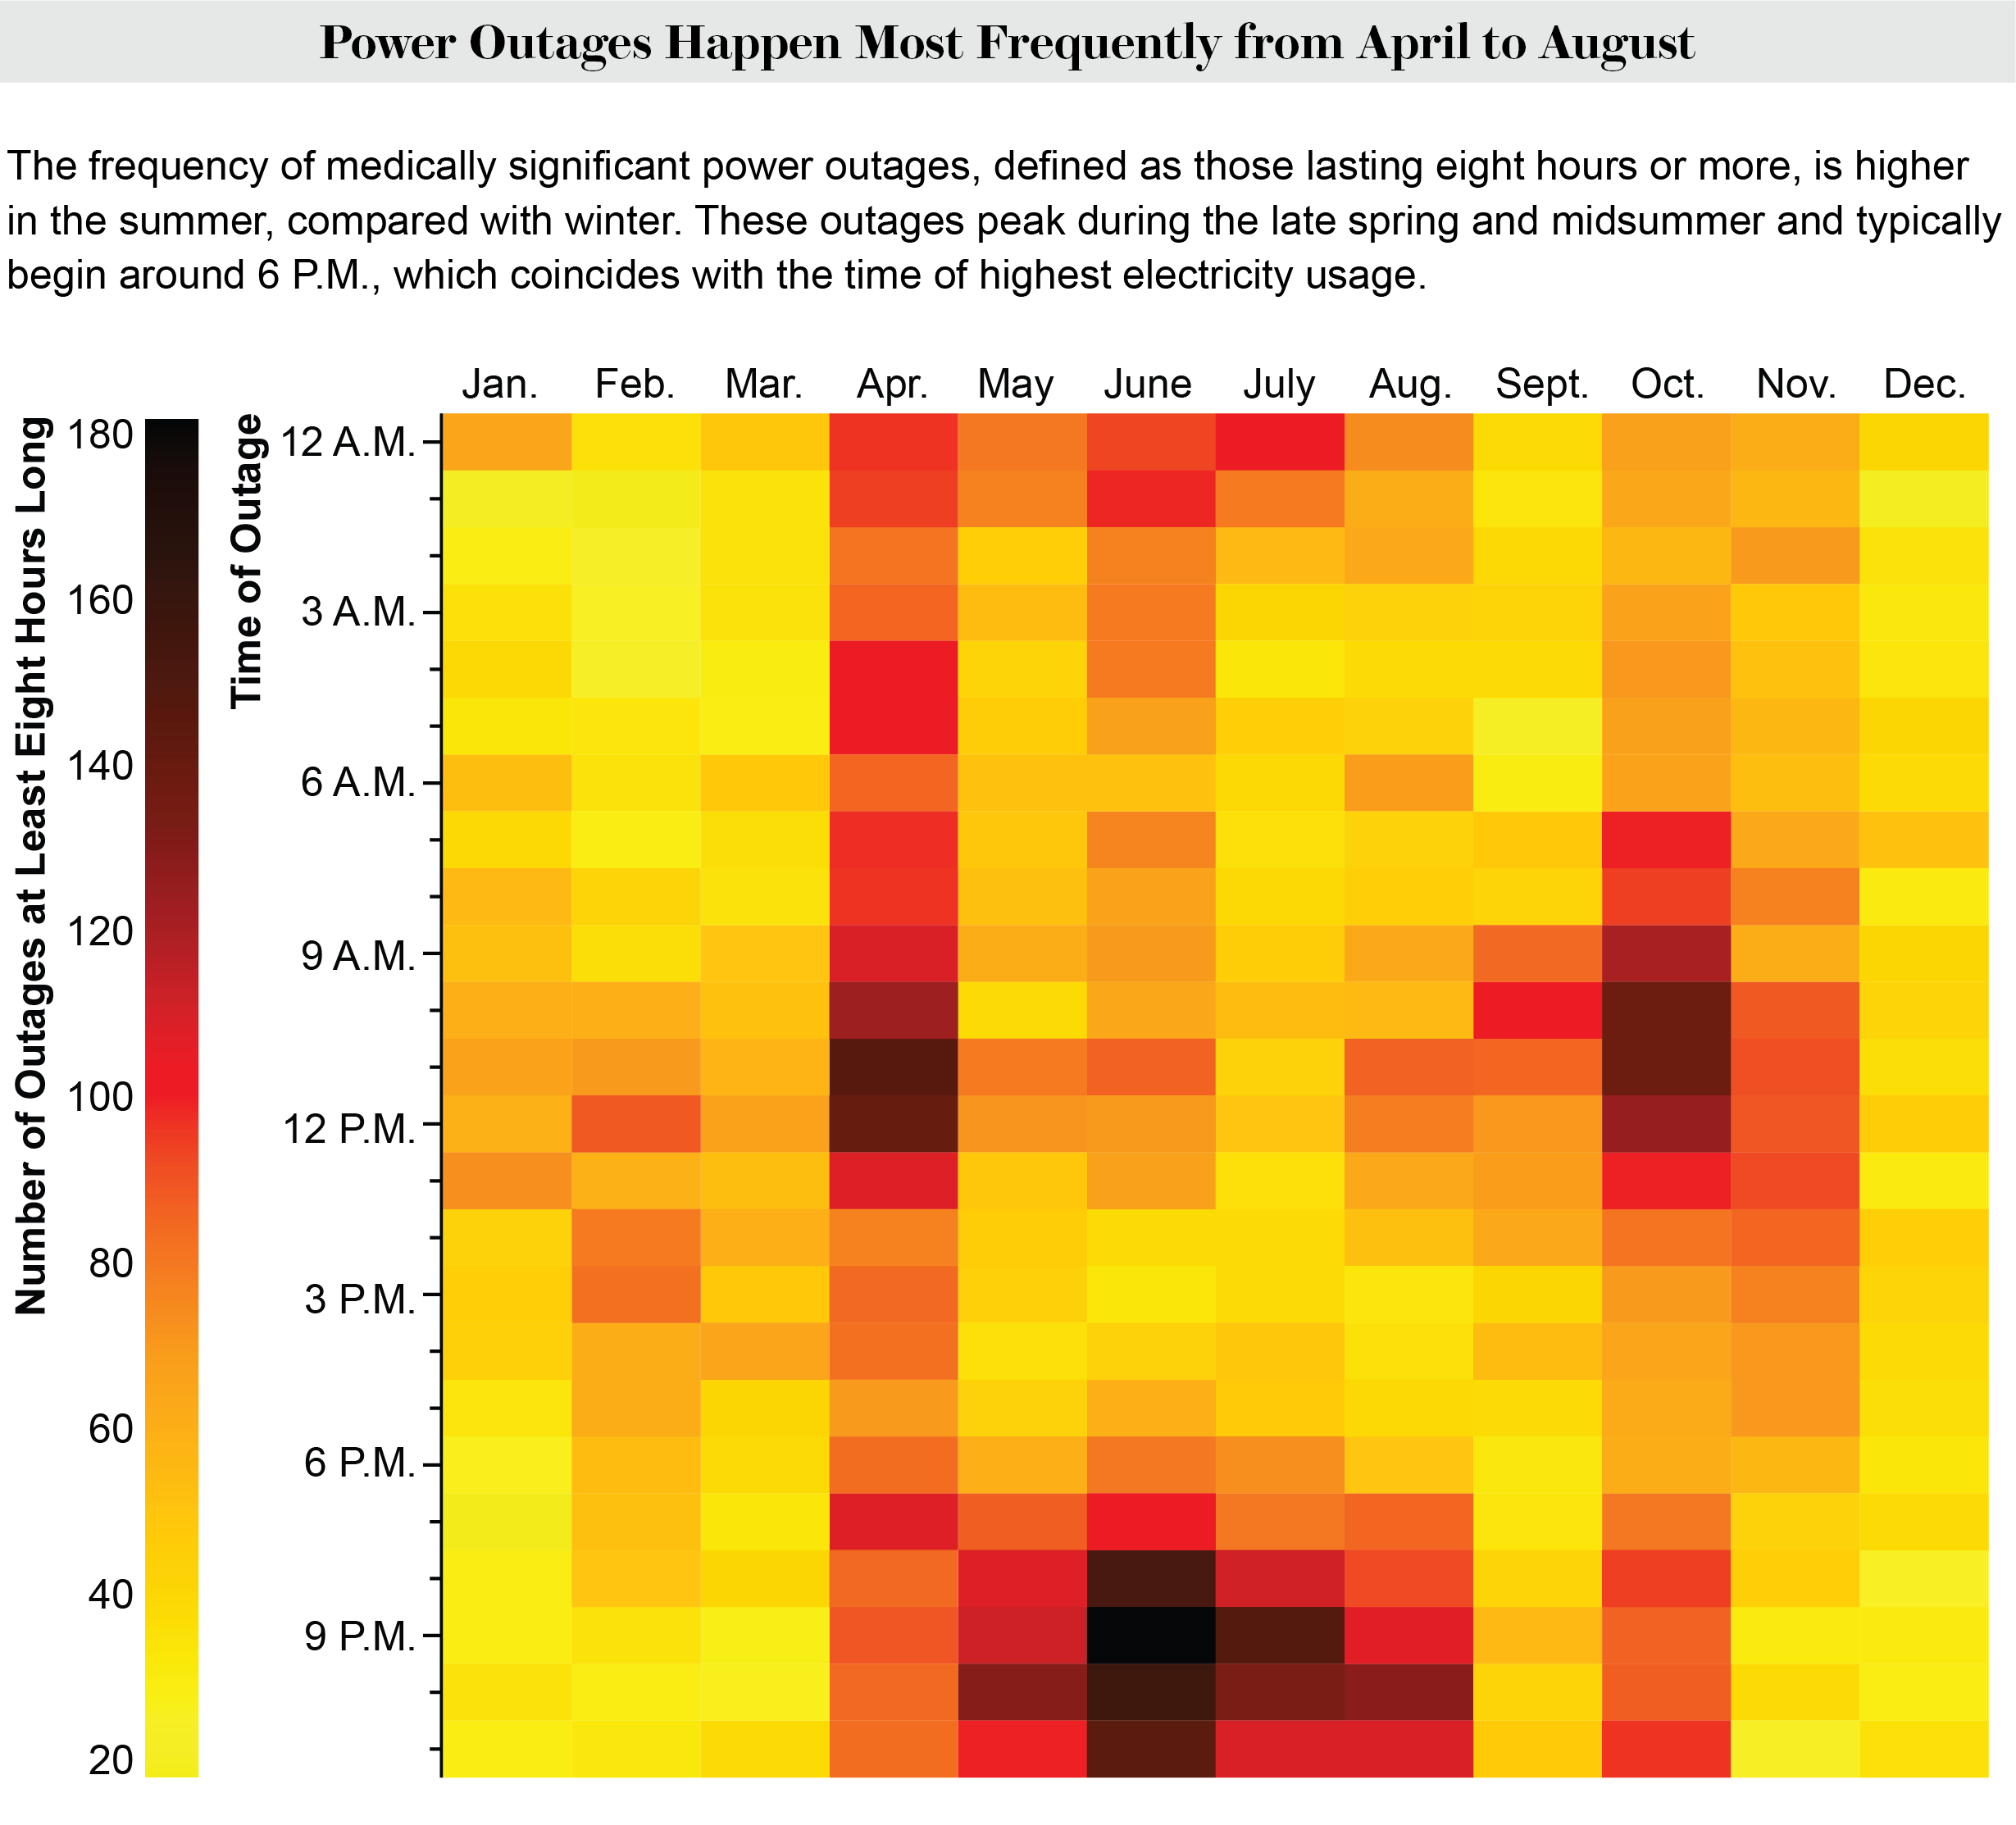 A heat map shows the frequency of power outages based on each month and the onset time of outage.